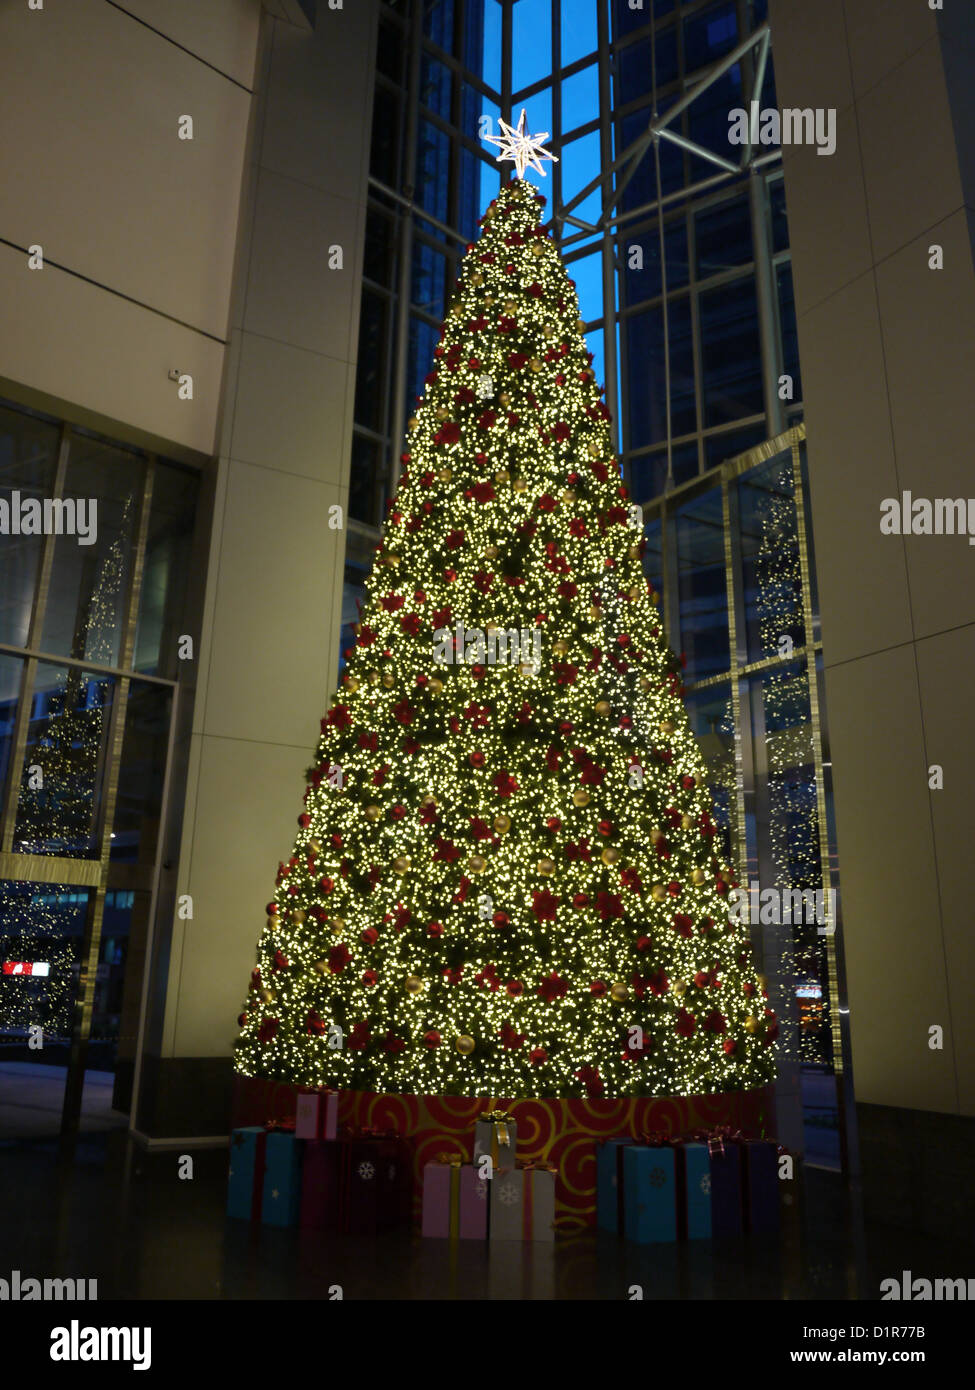 tall indoor christmas tree office building Stock Photo